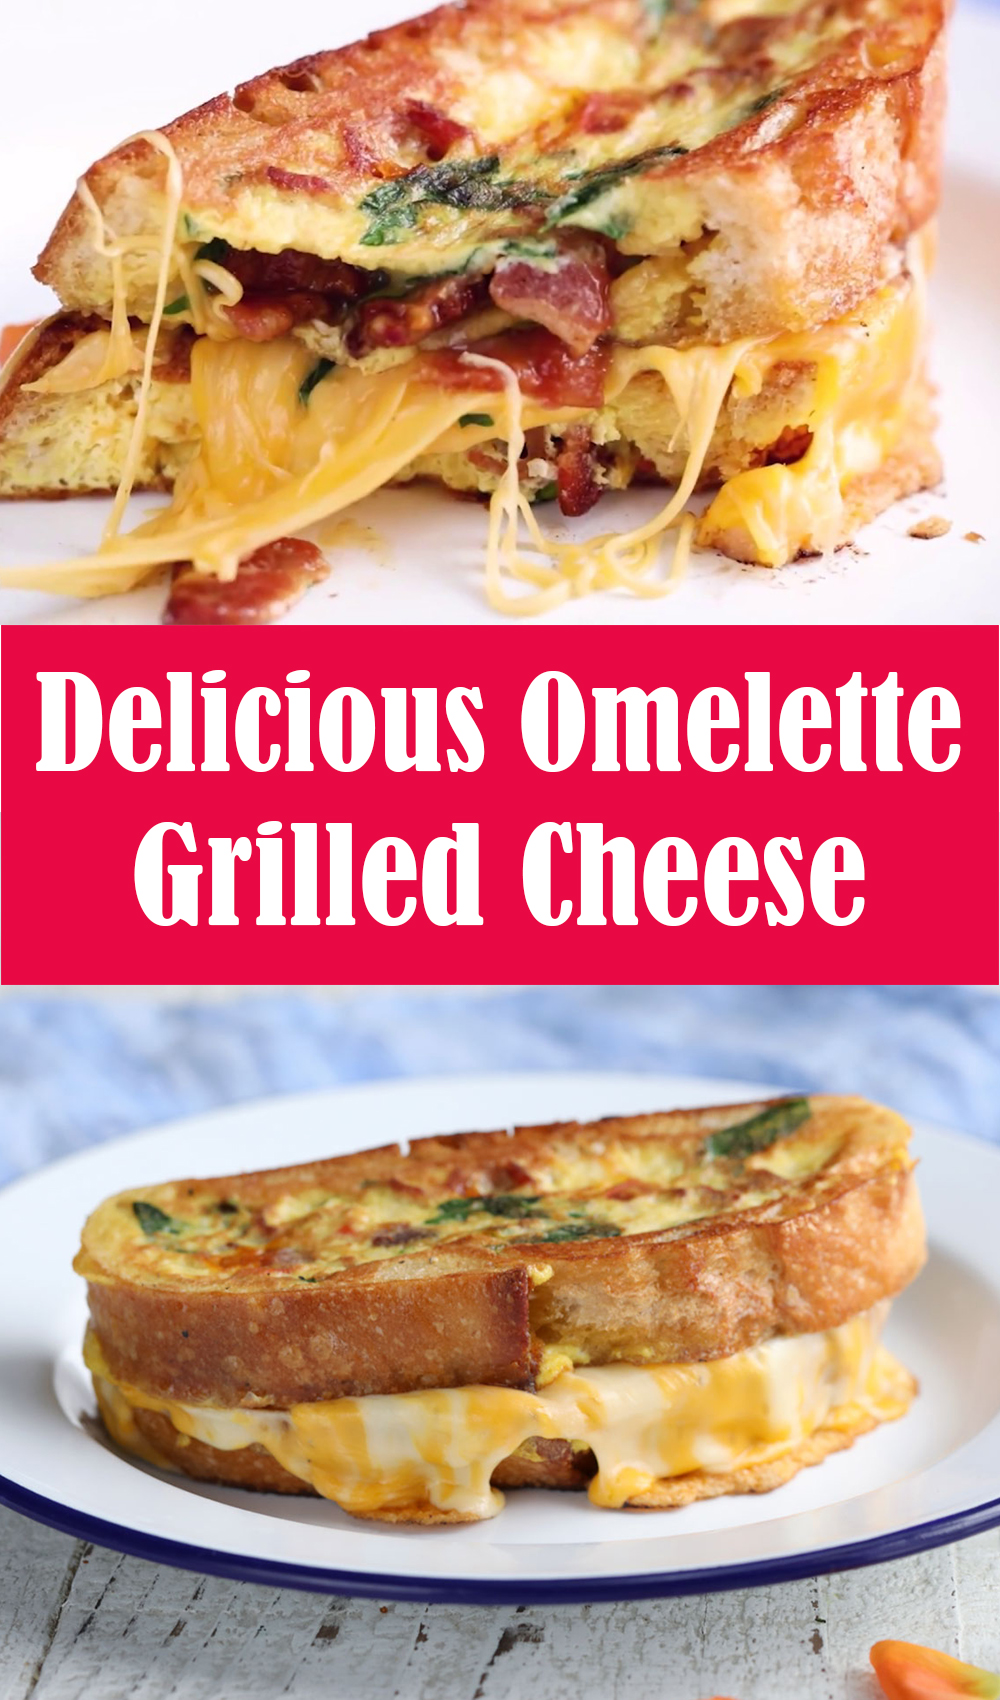 Omelette Grilled Cheese